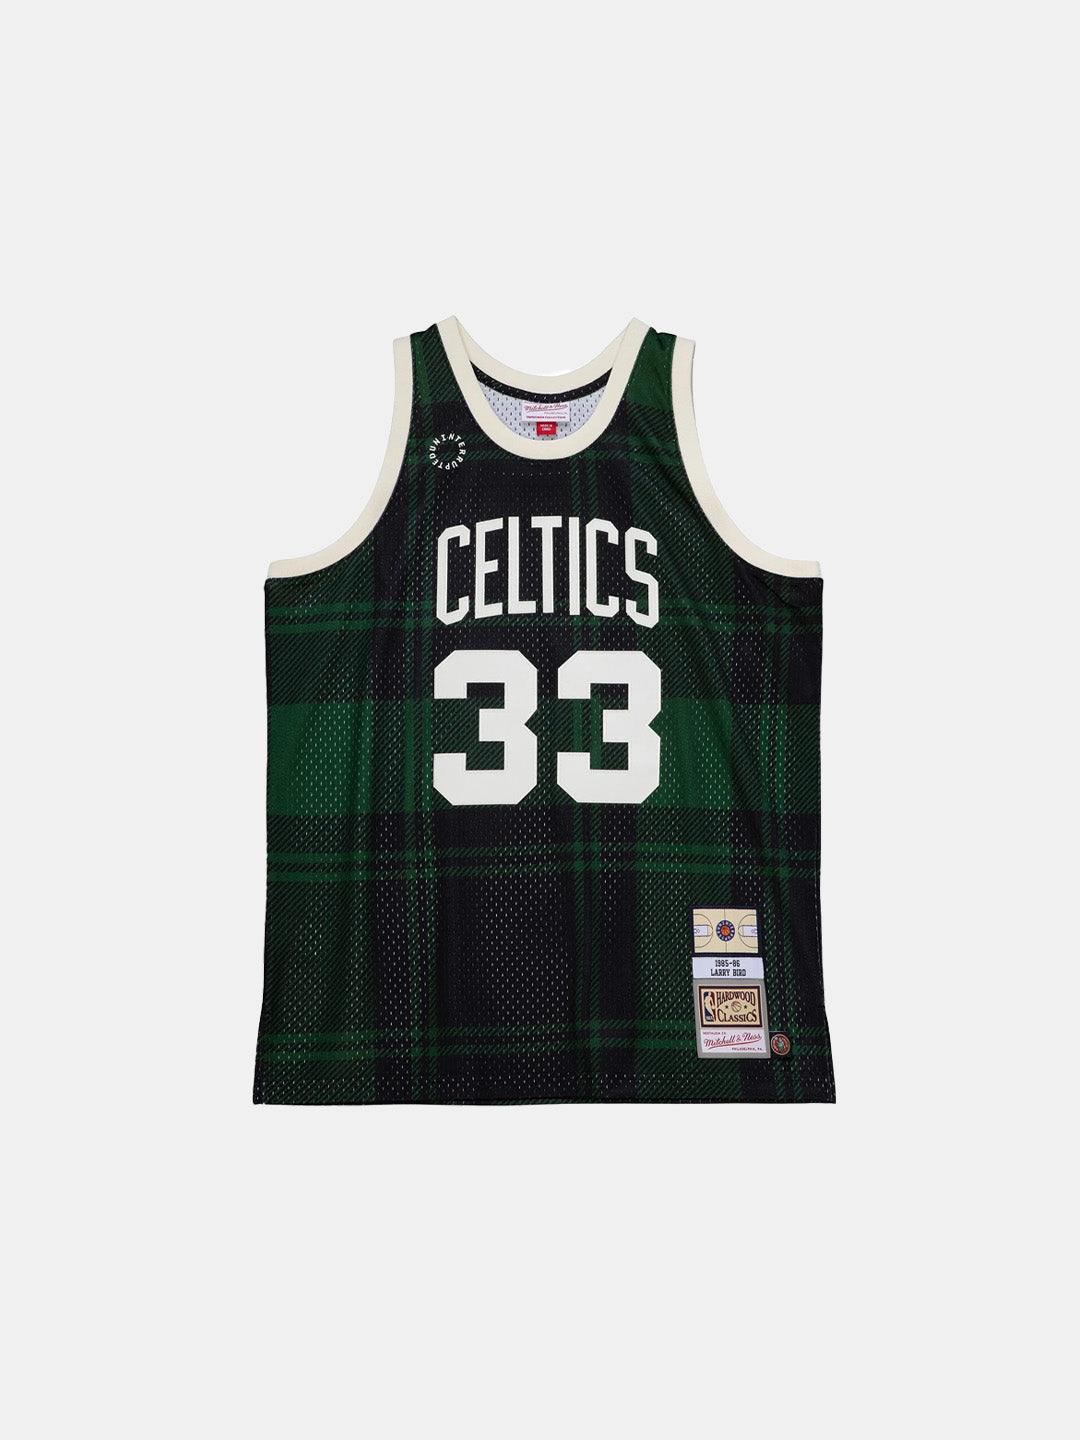 UNINTERRUPTED X Mitchell & Ness Legends Jersey Celtics - front view of the plaid green and black jersey